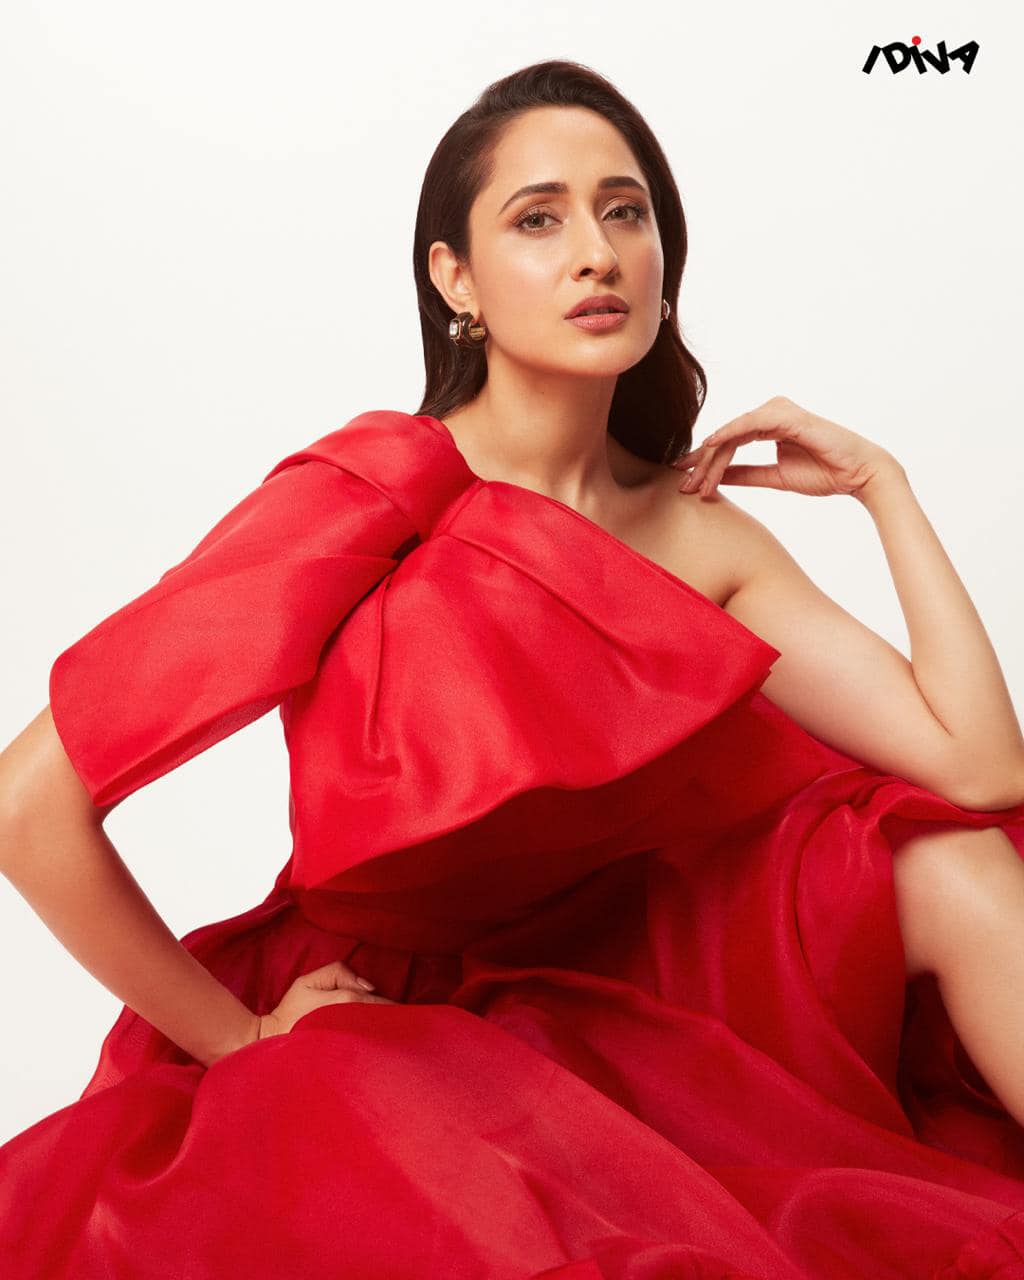 Stupendous poses of Pragya Jaiswal in red gown